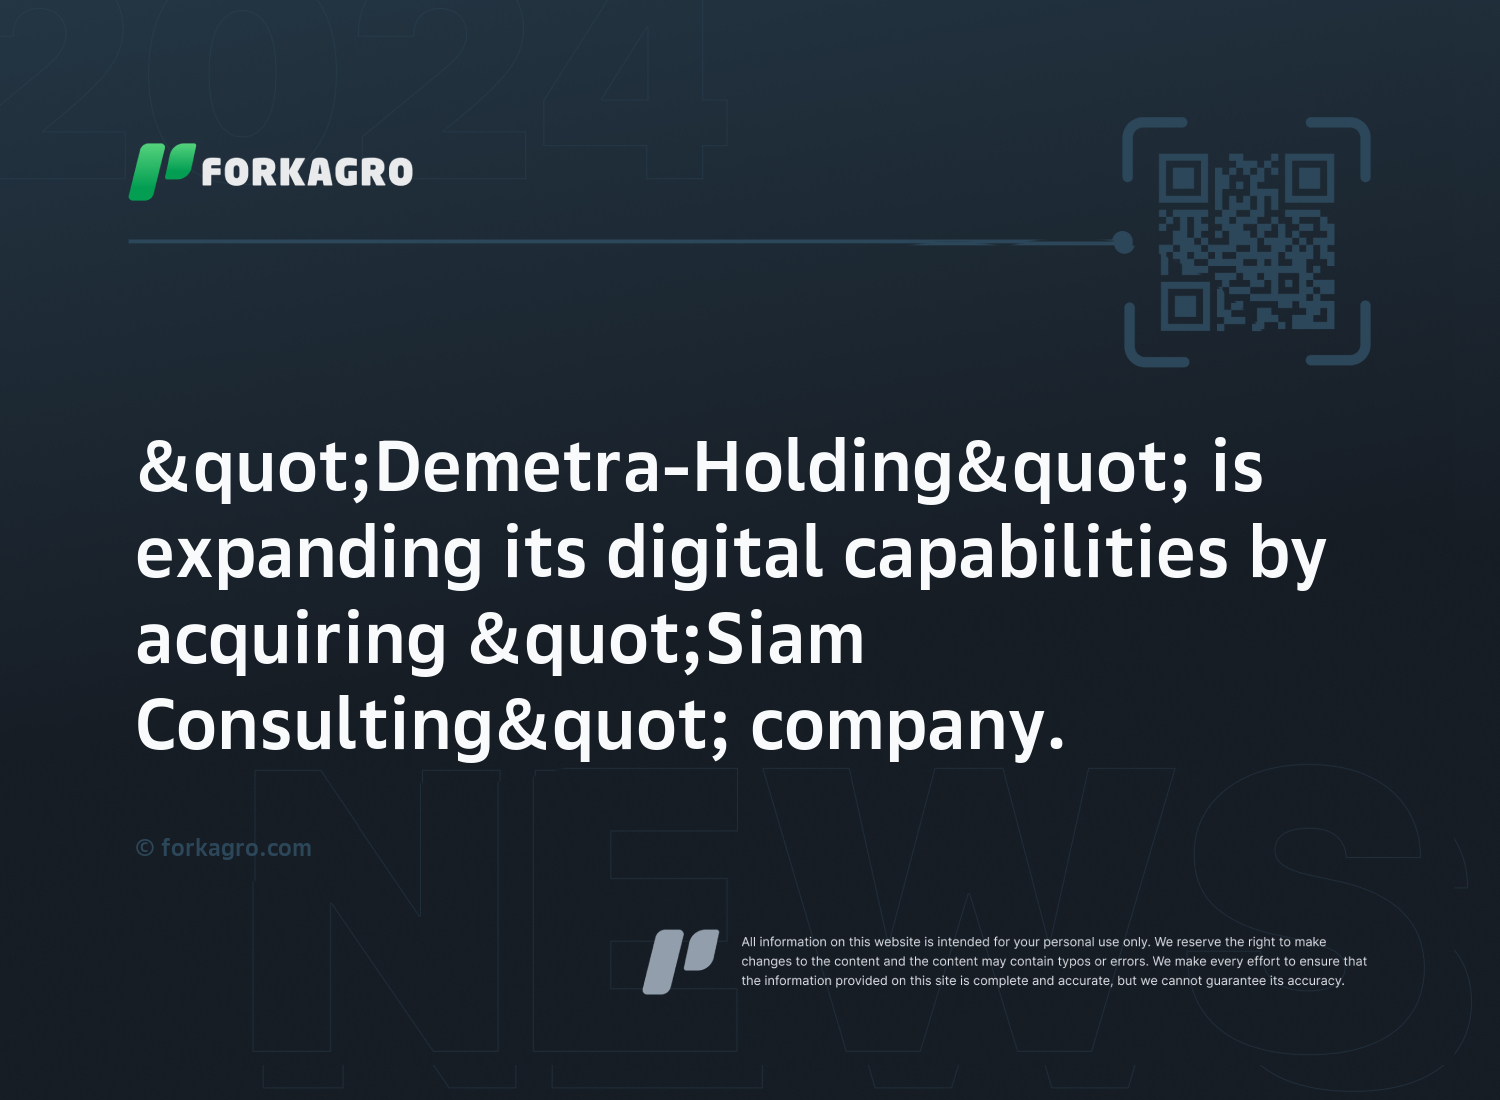 "Demetra-Holding" is expanding its digital capabilities by acquiring "Siam Consulting" company.